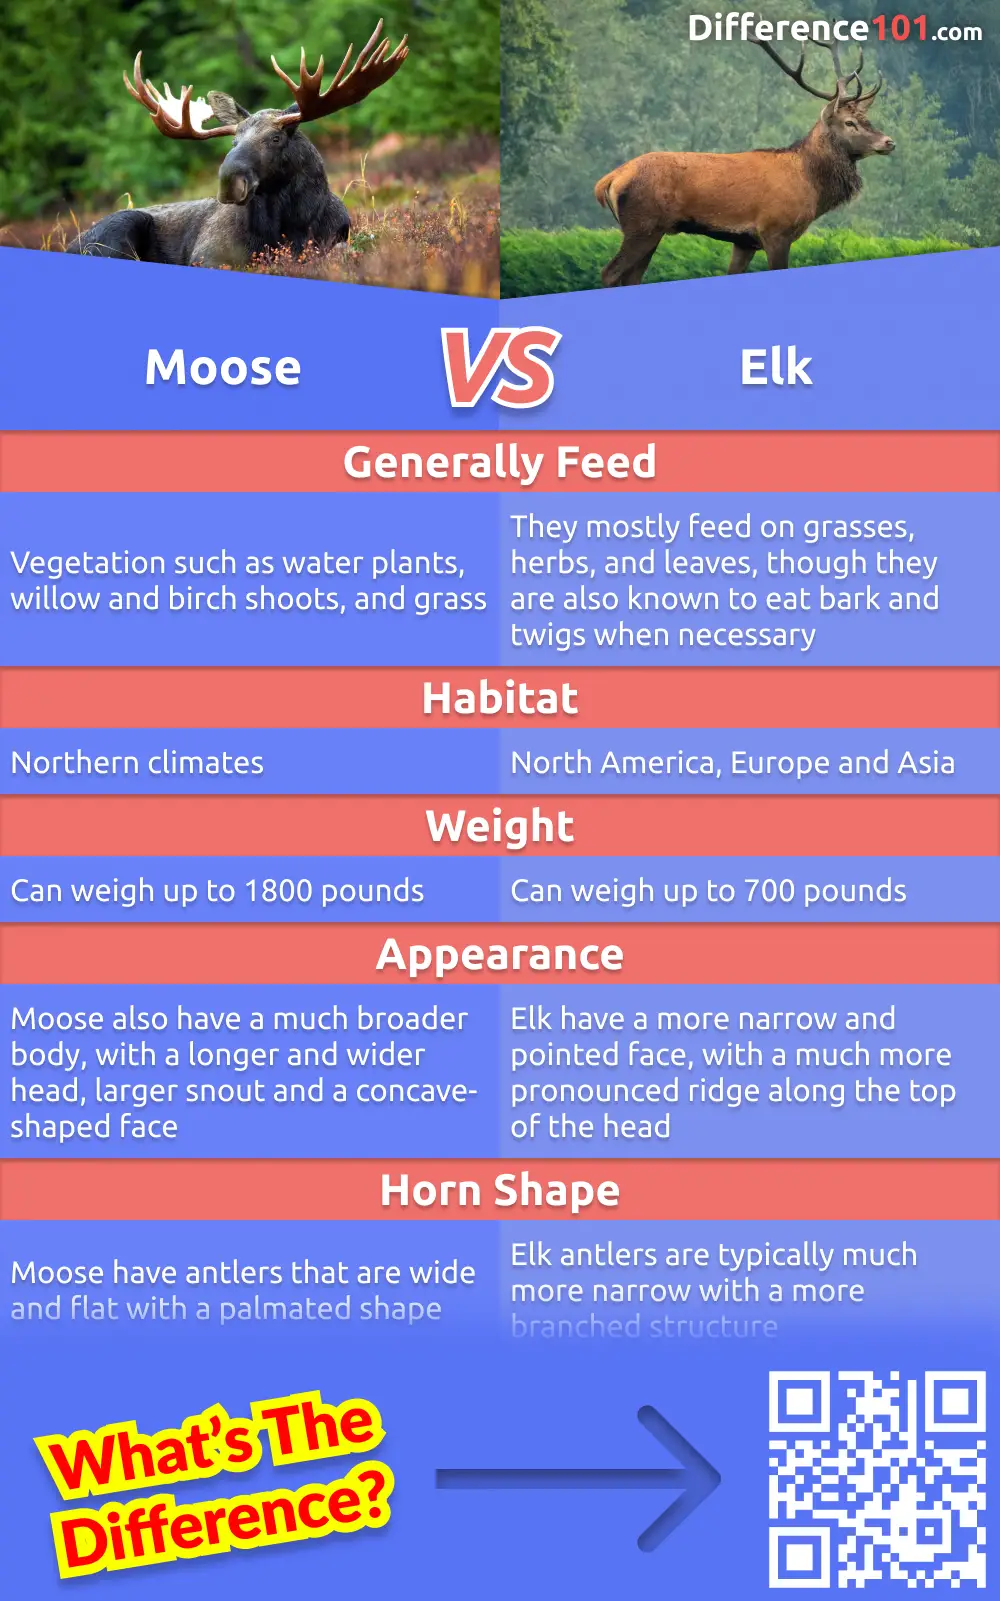 Moose and elk are both large animals that live in cold climates. But what are the differences between them? And what are the pros and cons of each animal? Read on to find out.